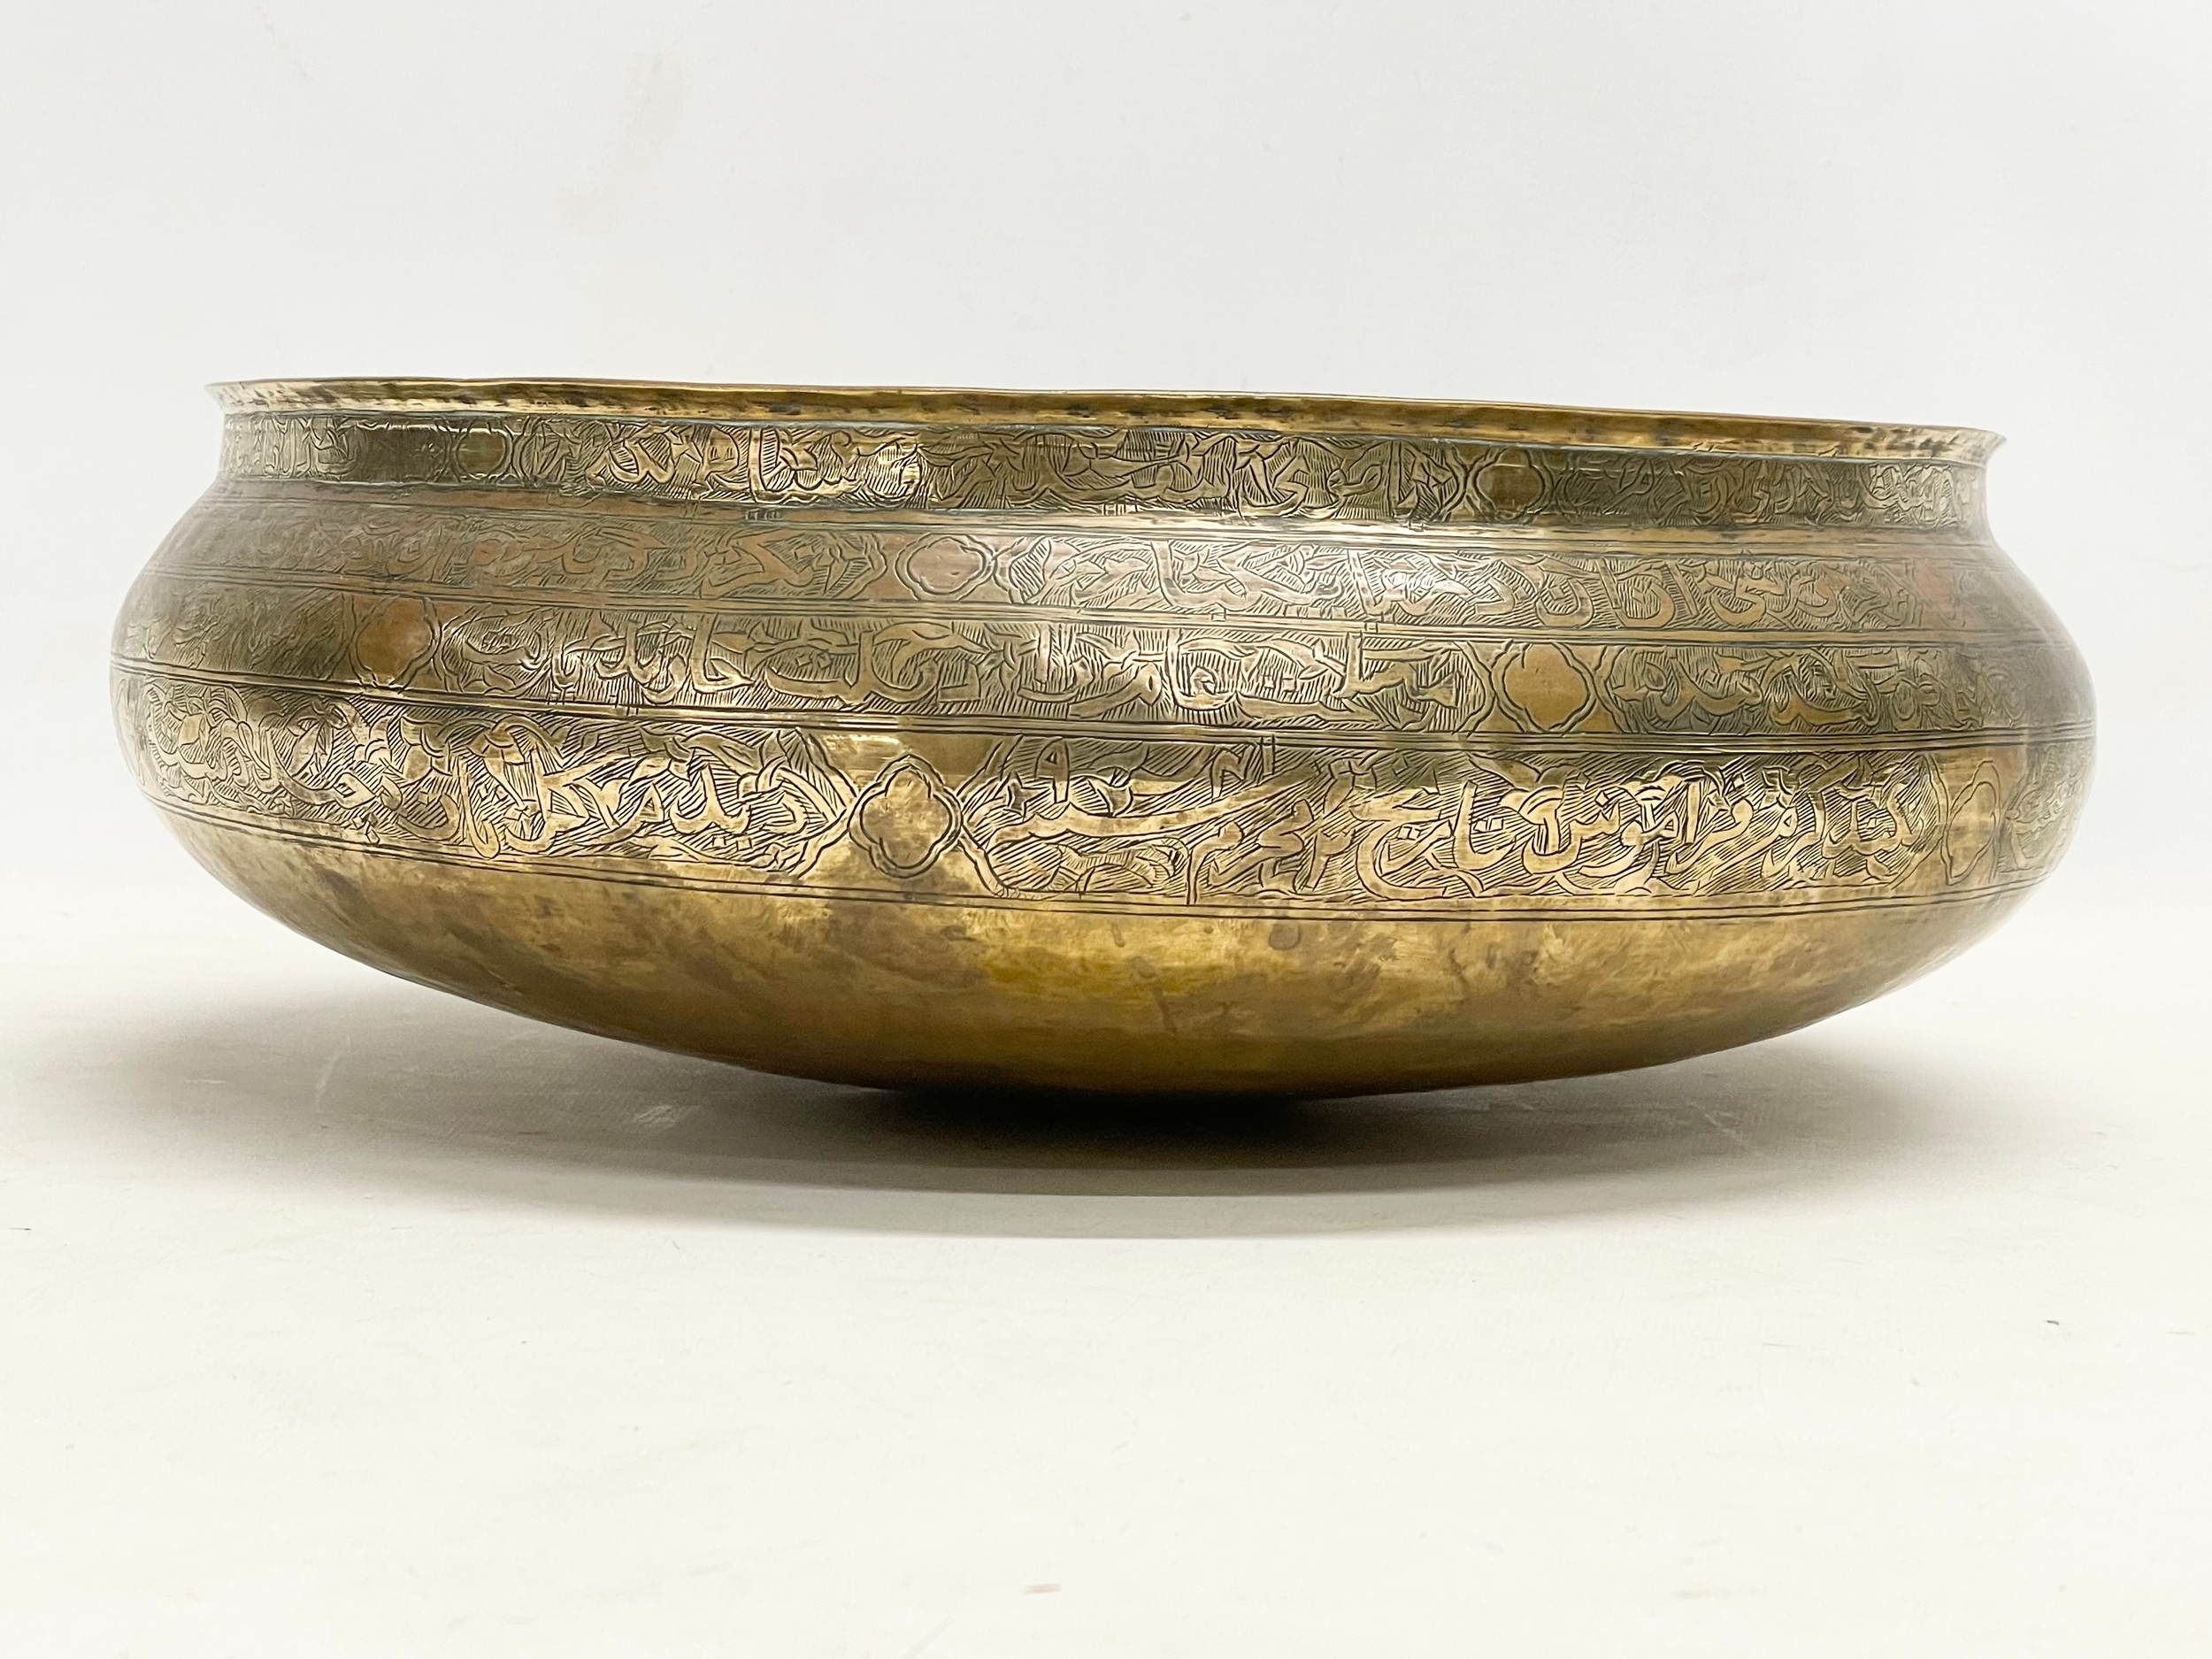 A large 19th century Middle Eastern brass bowl with a late 19th/early 20th century brass vase. - Image 9 of 13